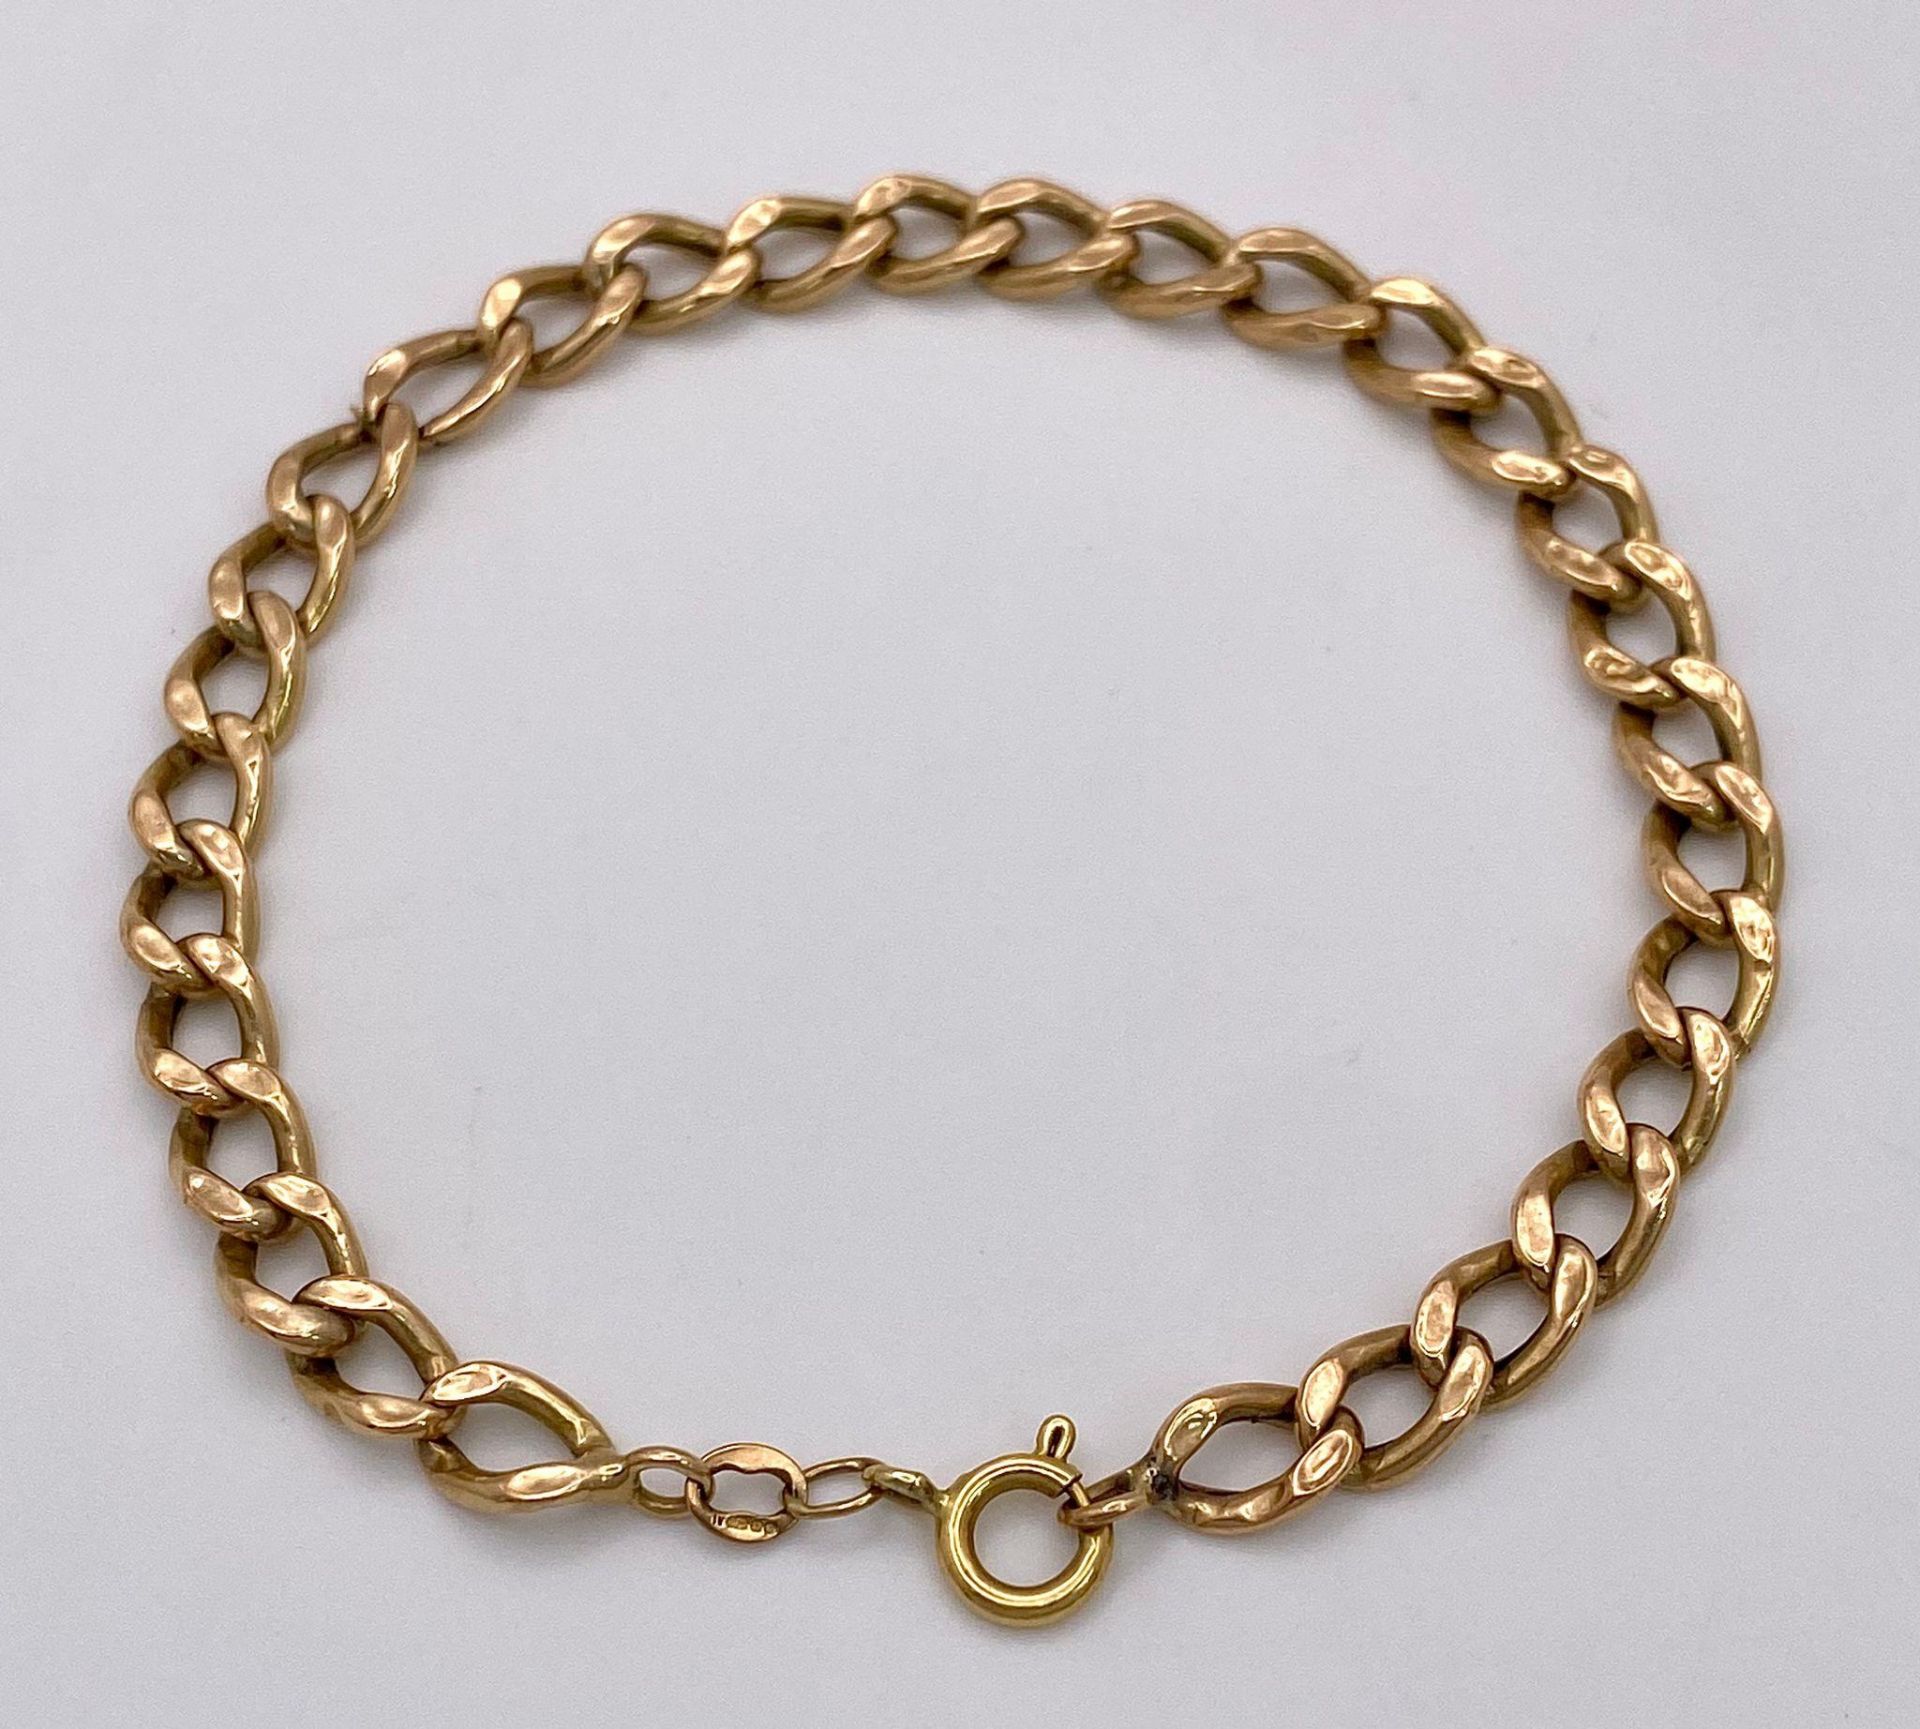 An 18K Yellow Gold Flat Curb Link Bracelet. 19cm. 4.25g weight. - Image 4 of 6